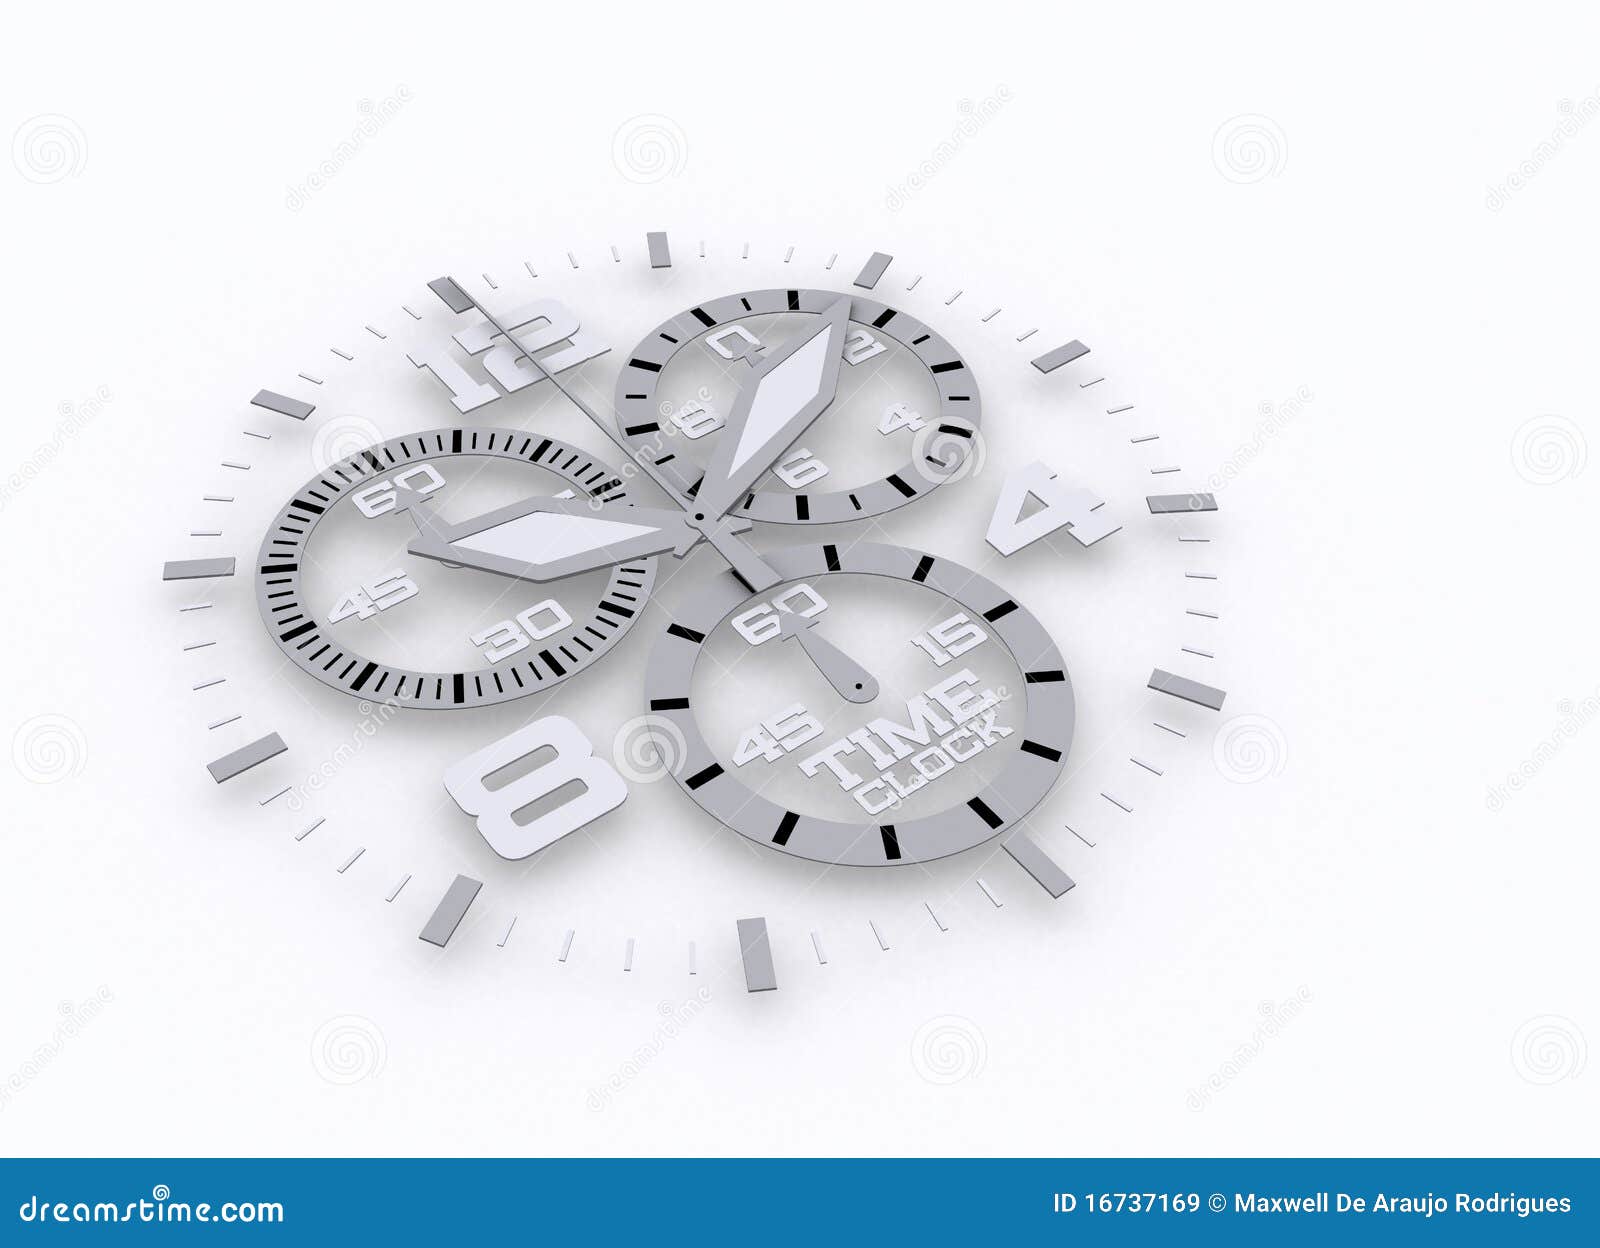 watch detail in 3d time